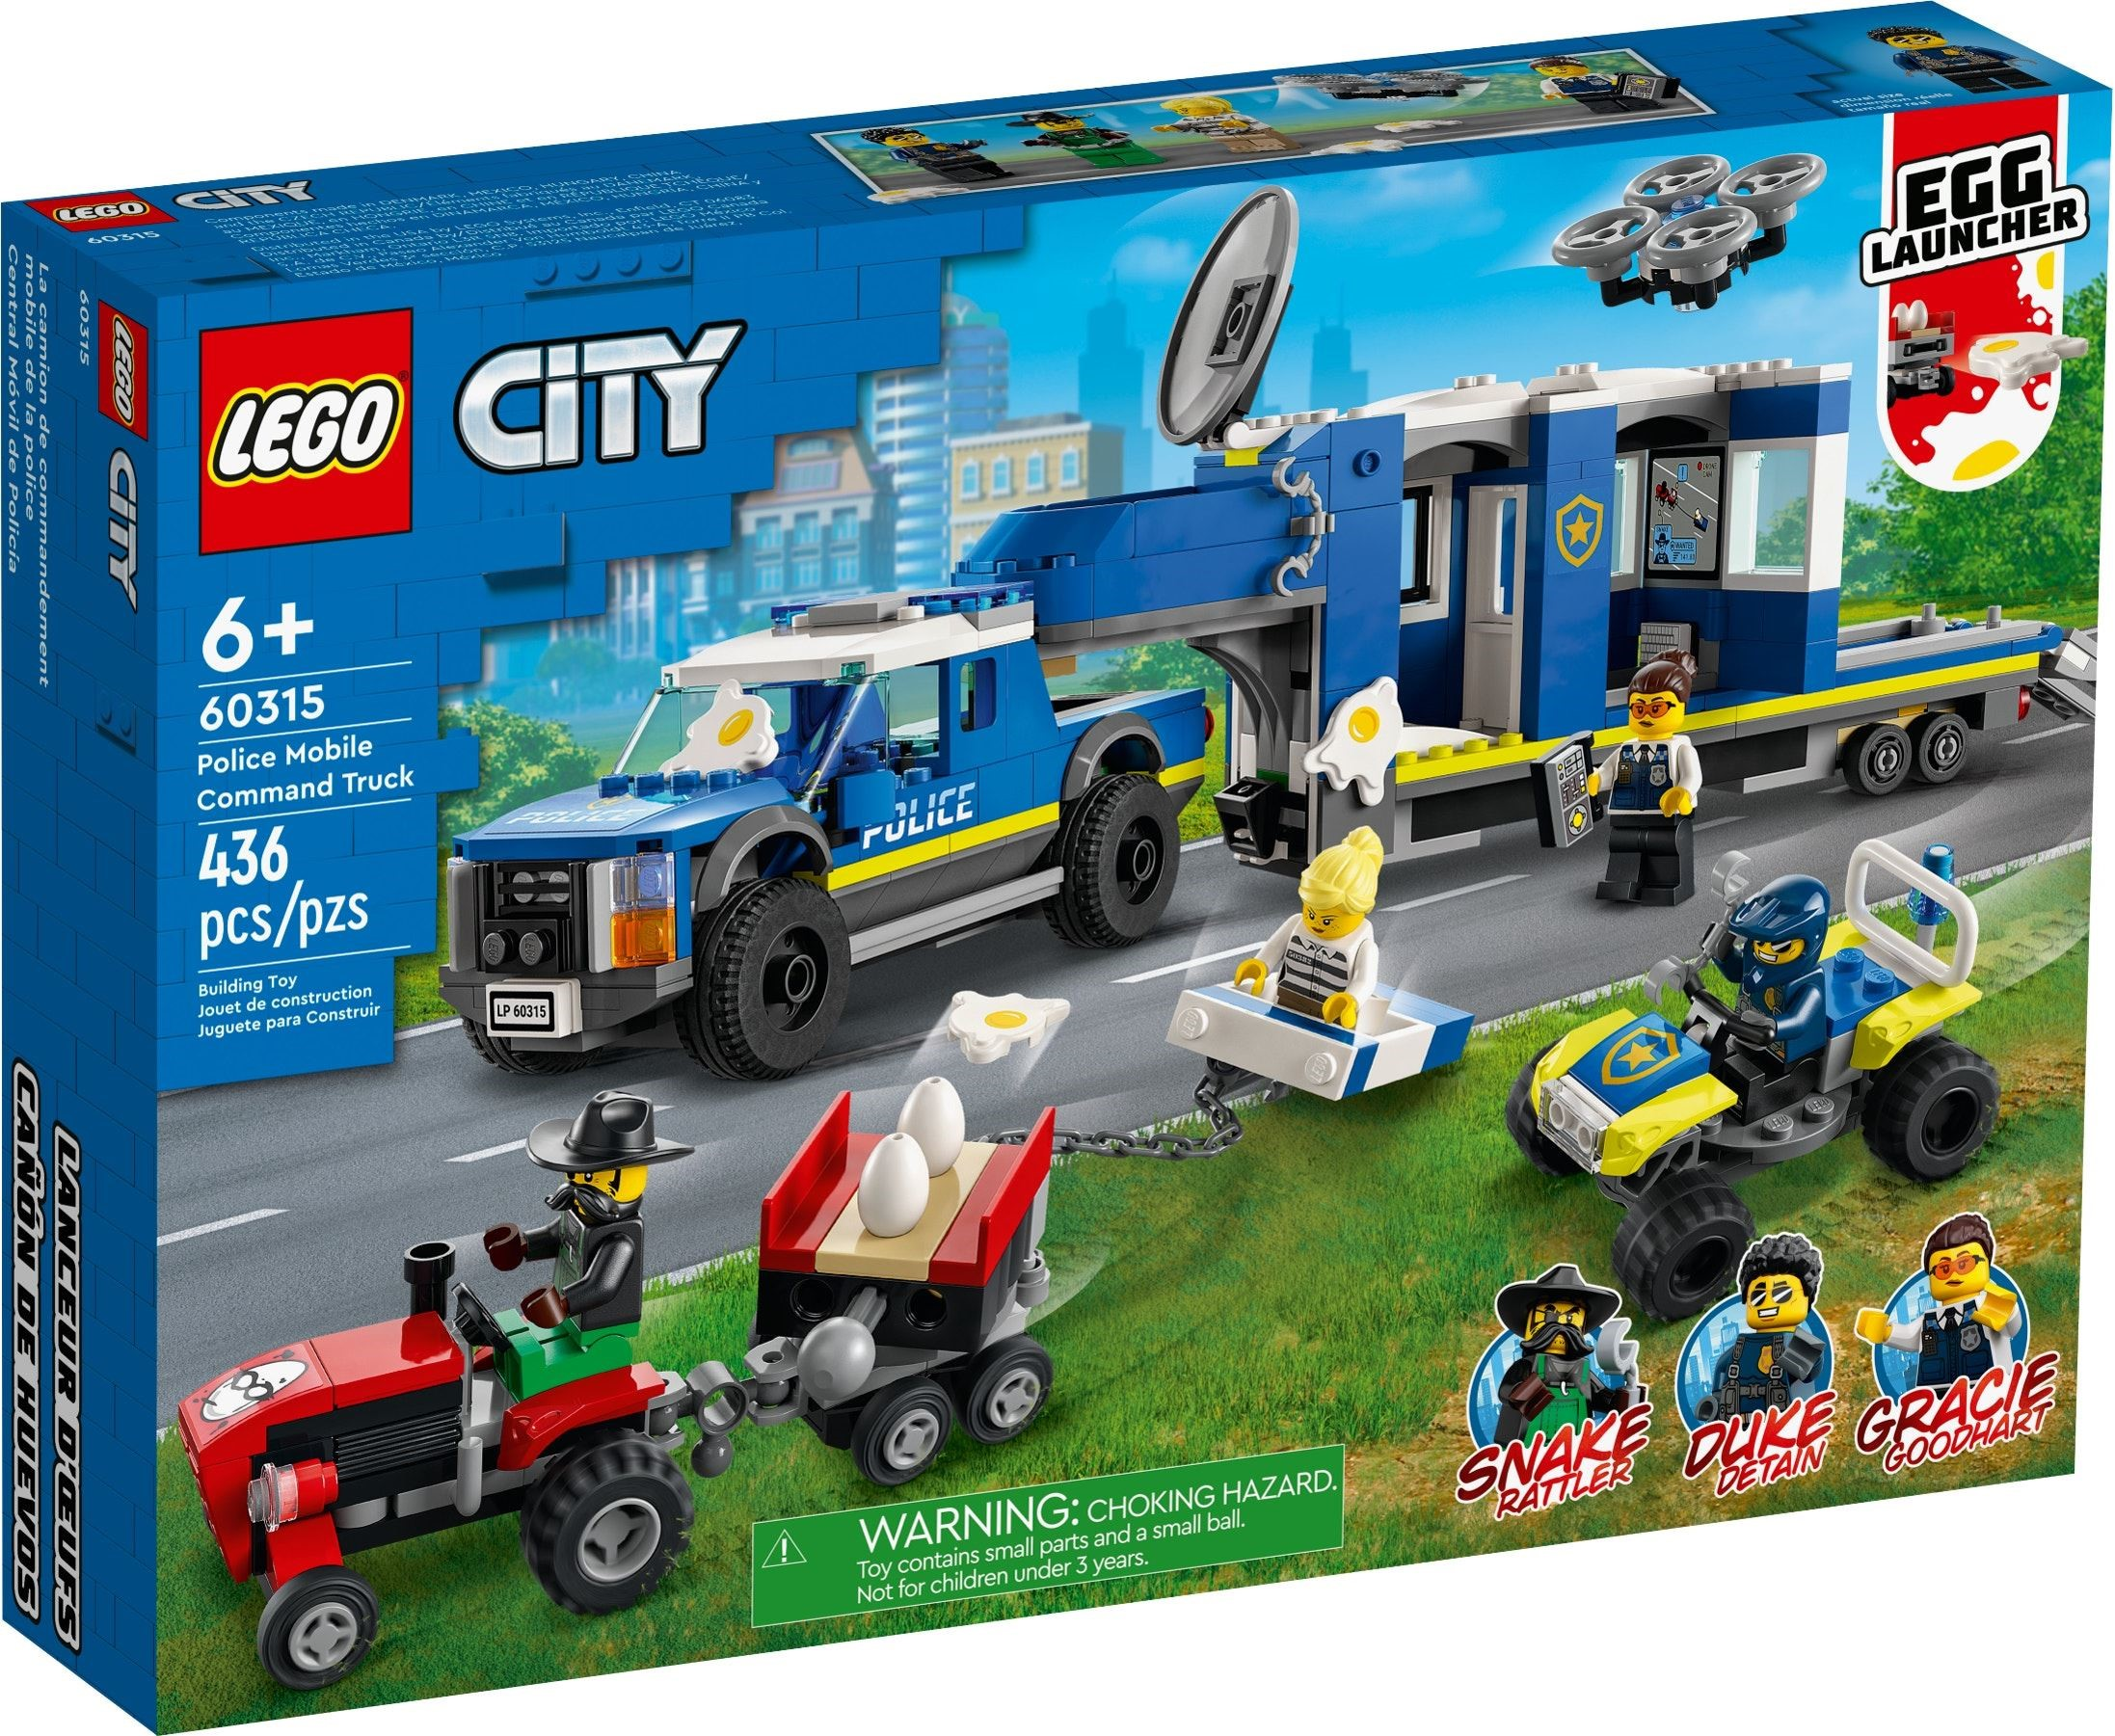 60315 Police Mobile Command Truck, Lego City Adventures Wiki